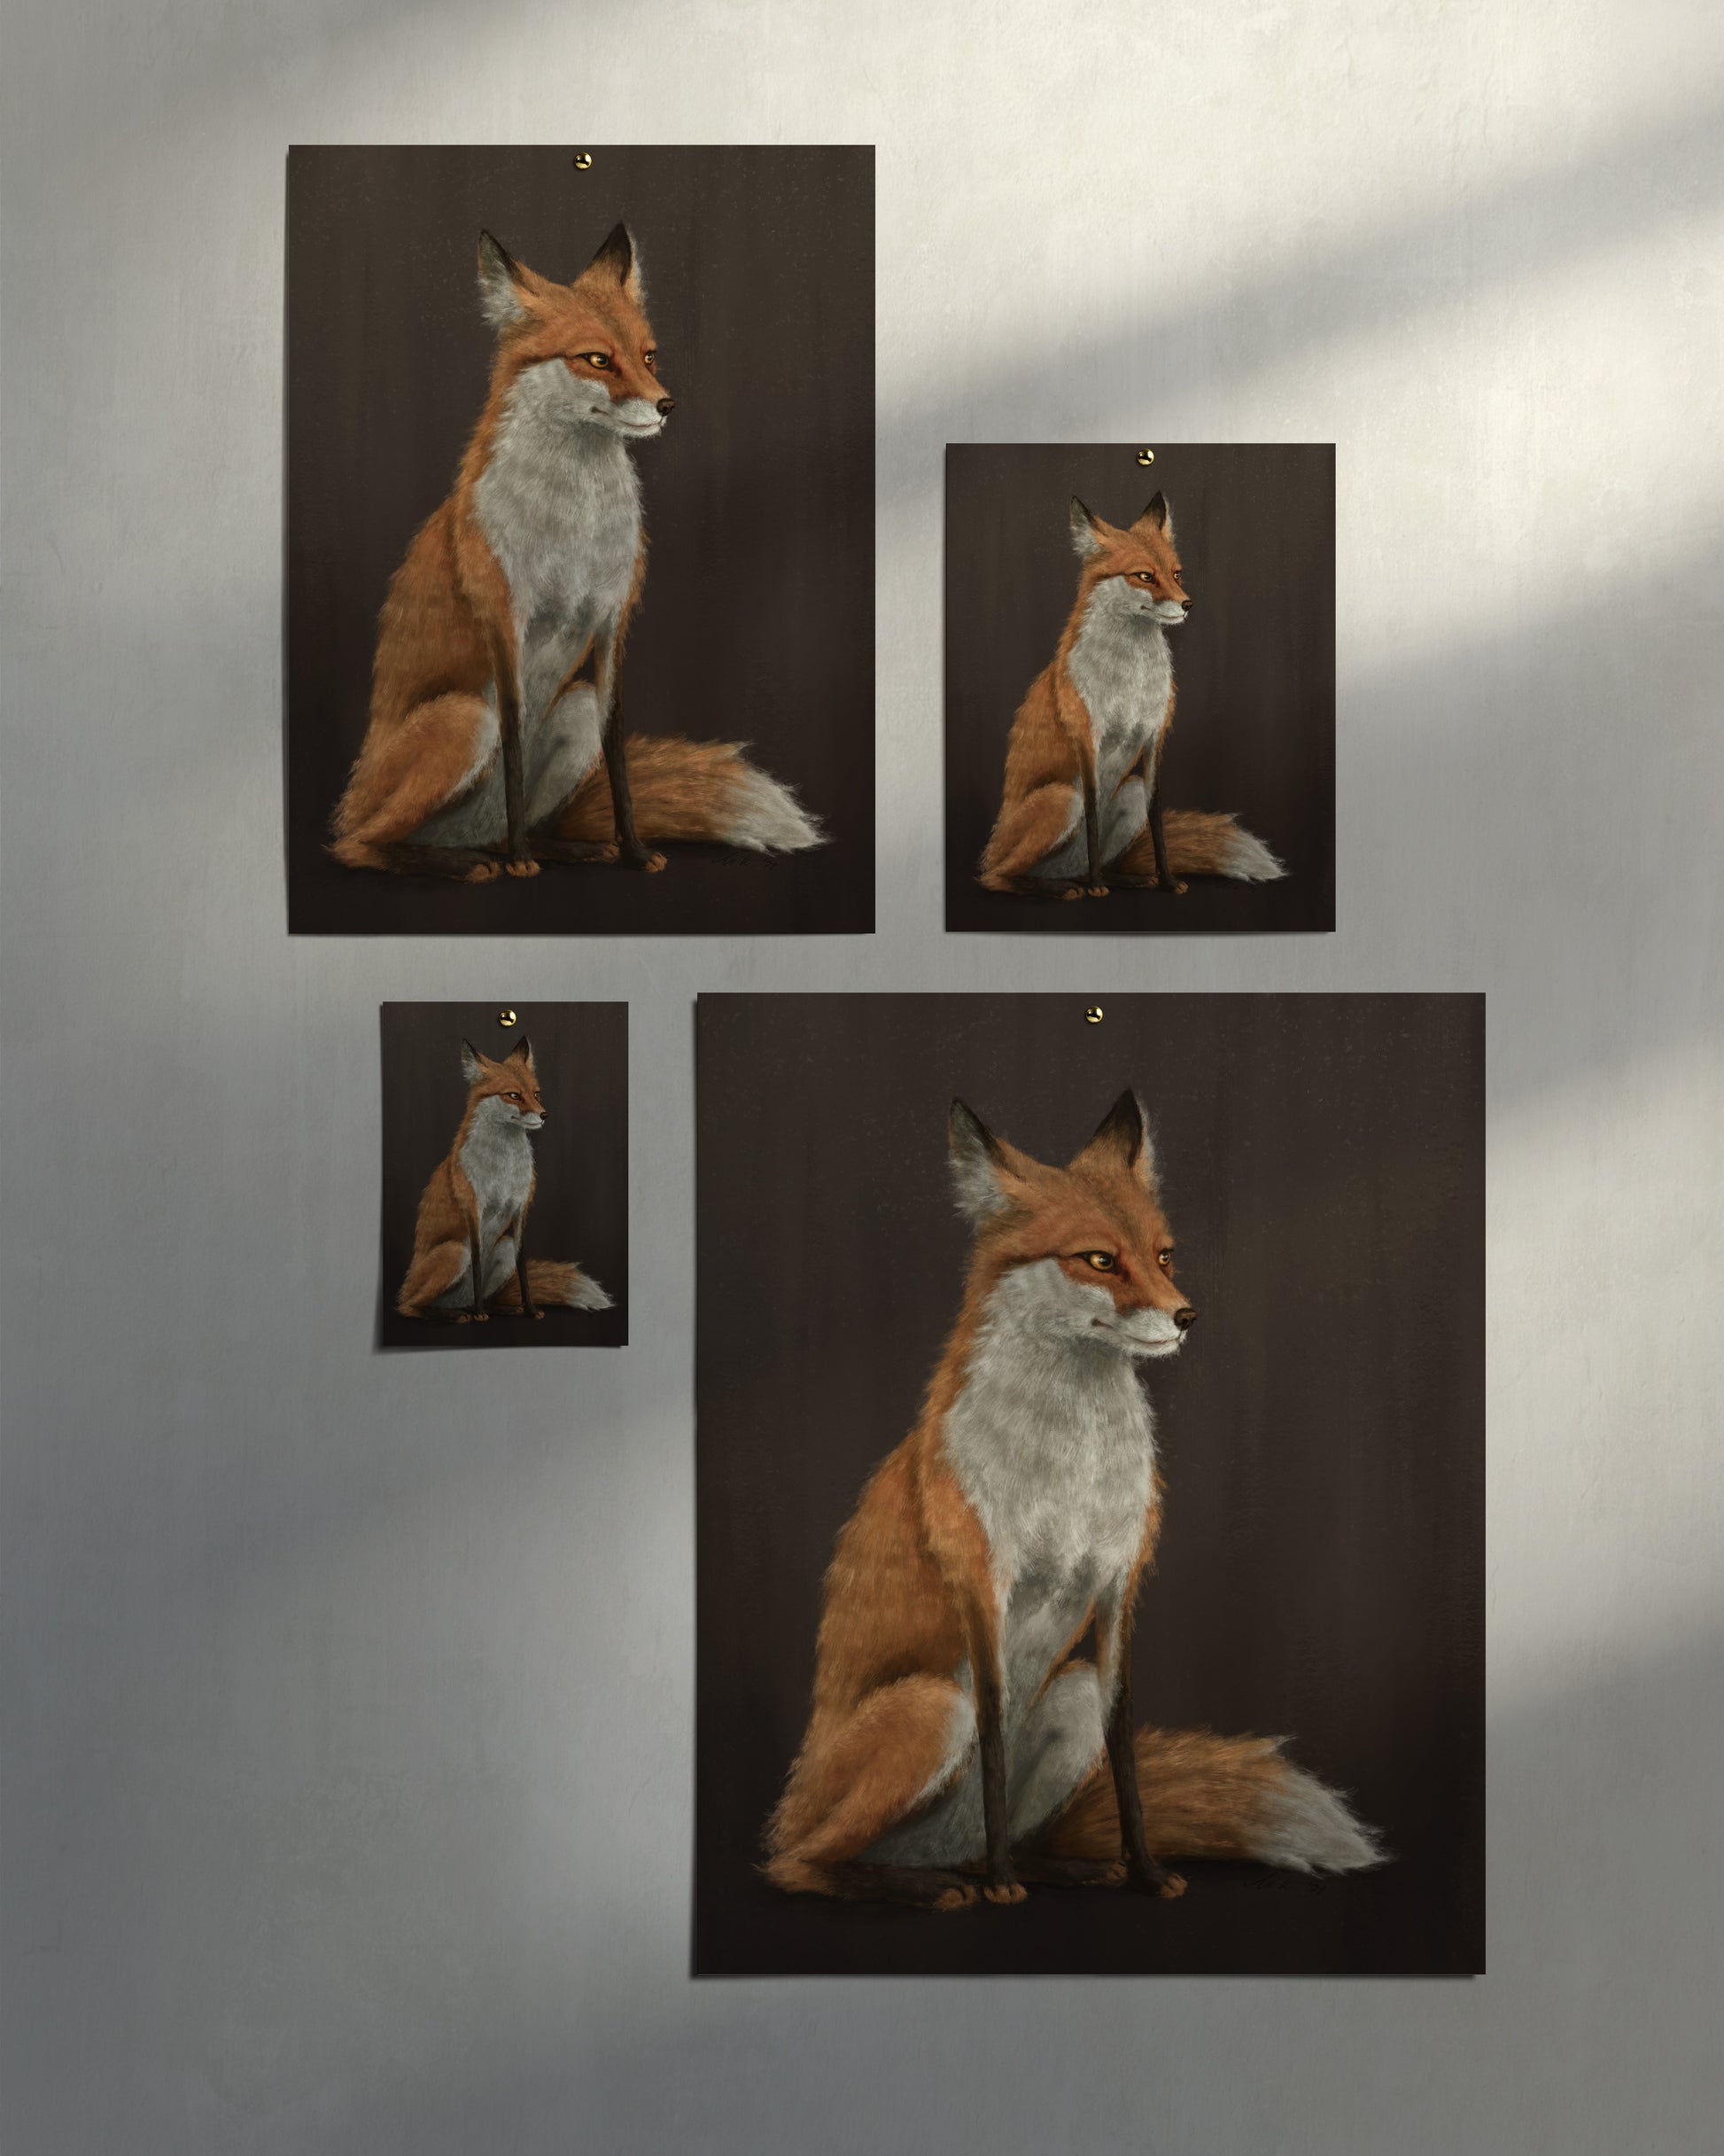 "The Woodland Fox - Brown Edition" by Catherine Hébert - Red Fox Giclée Art Print - Brown Edition